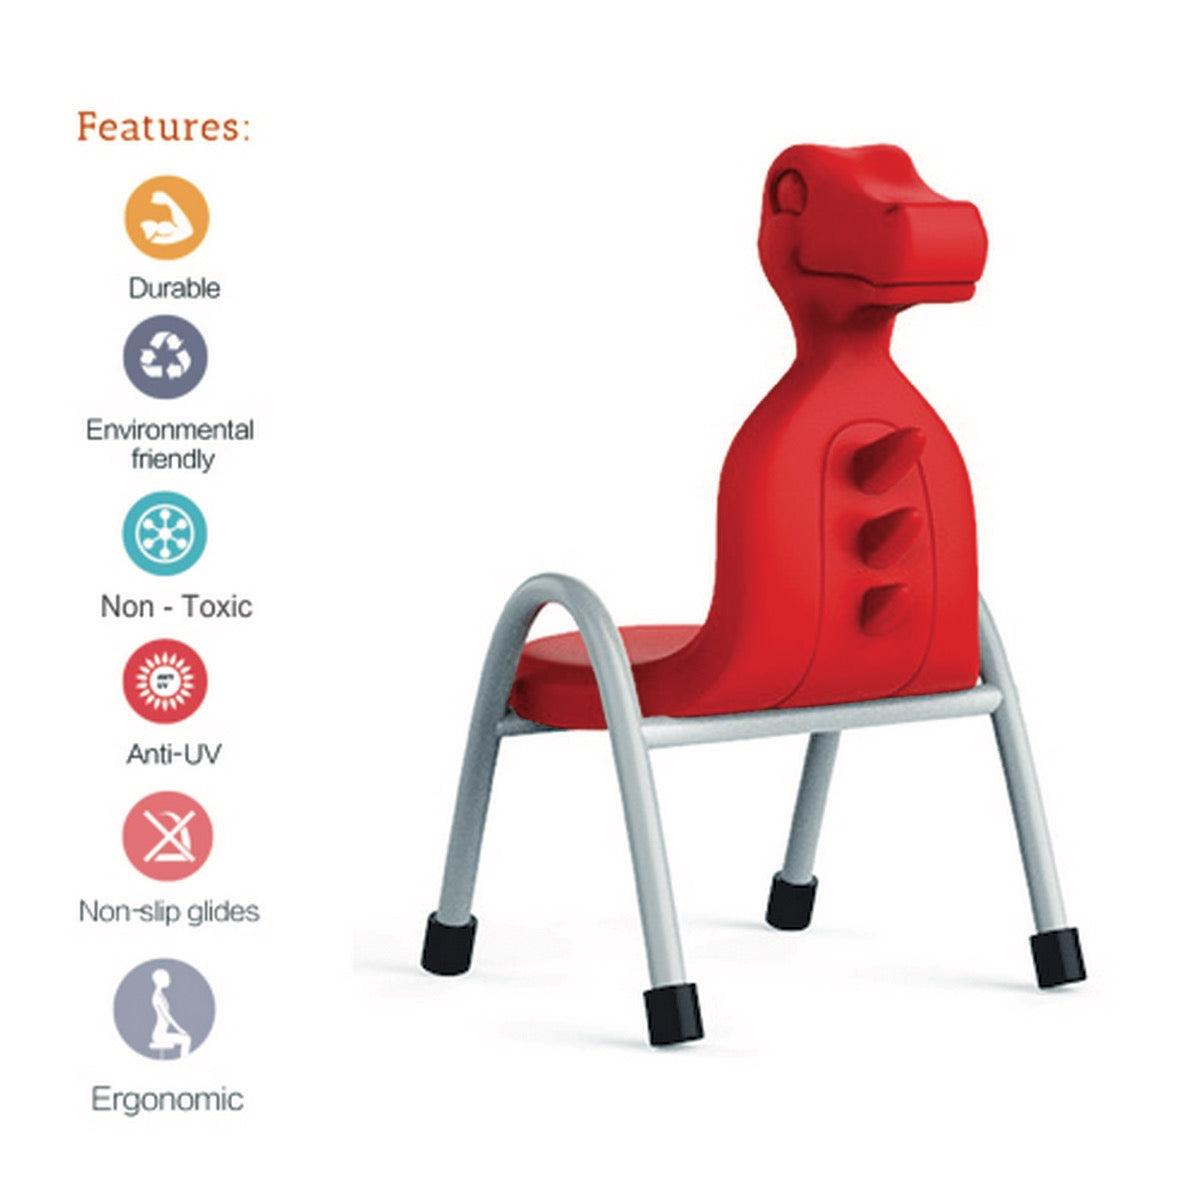 Ok Play Dino Chair, Study Chair, Sturdy And Durable Chair, Plastic Chair, Perfect For Home, Creches And School, Red, 5 to 10 Years, Height 10 Inches